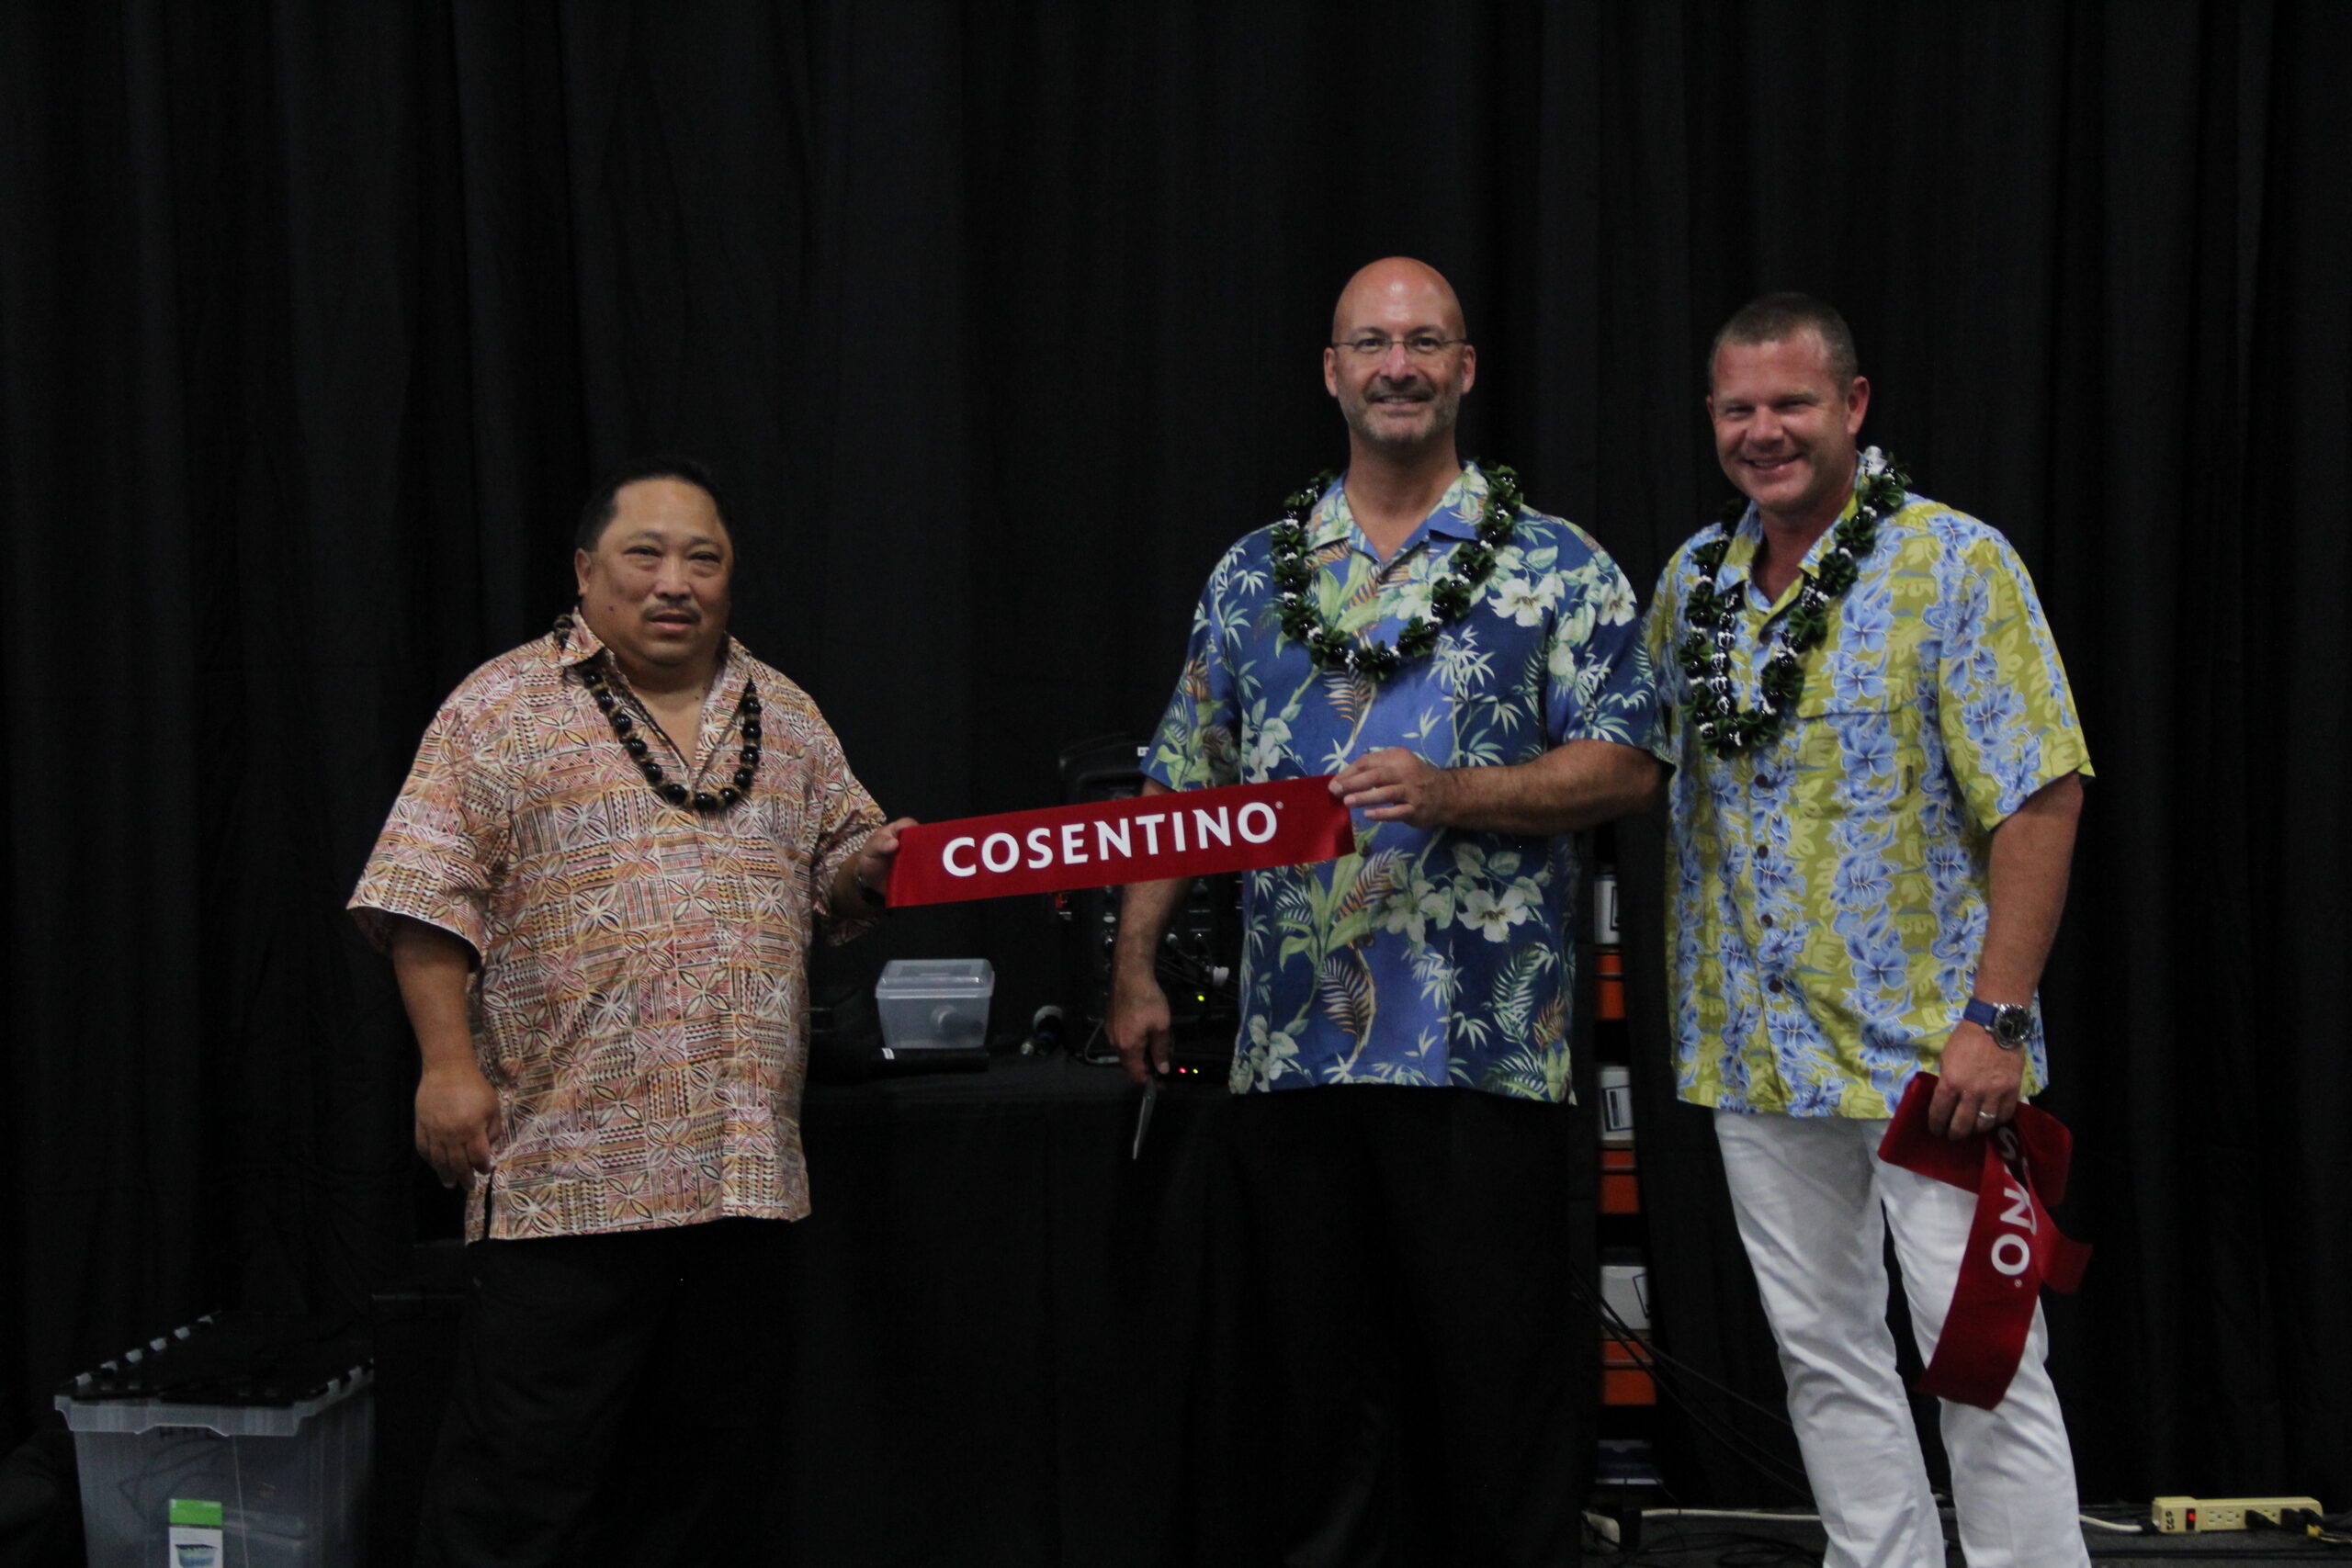 Image 34 of 2018 07 12 06.23.04 5 scaled in Cosentino Opens First Hawaii Center in Honolulu - Cosentino